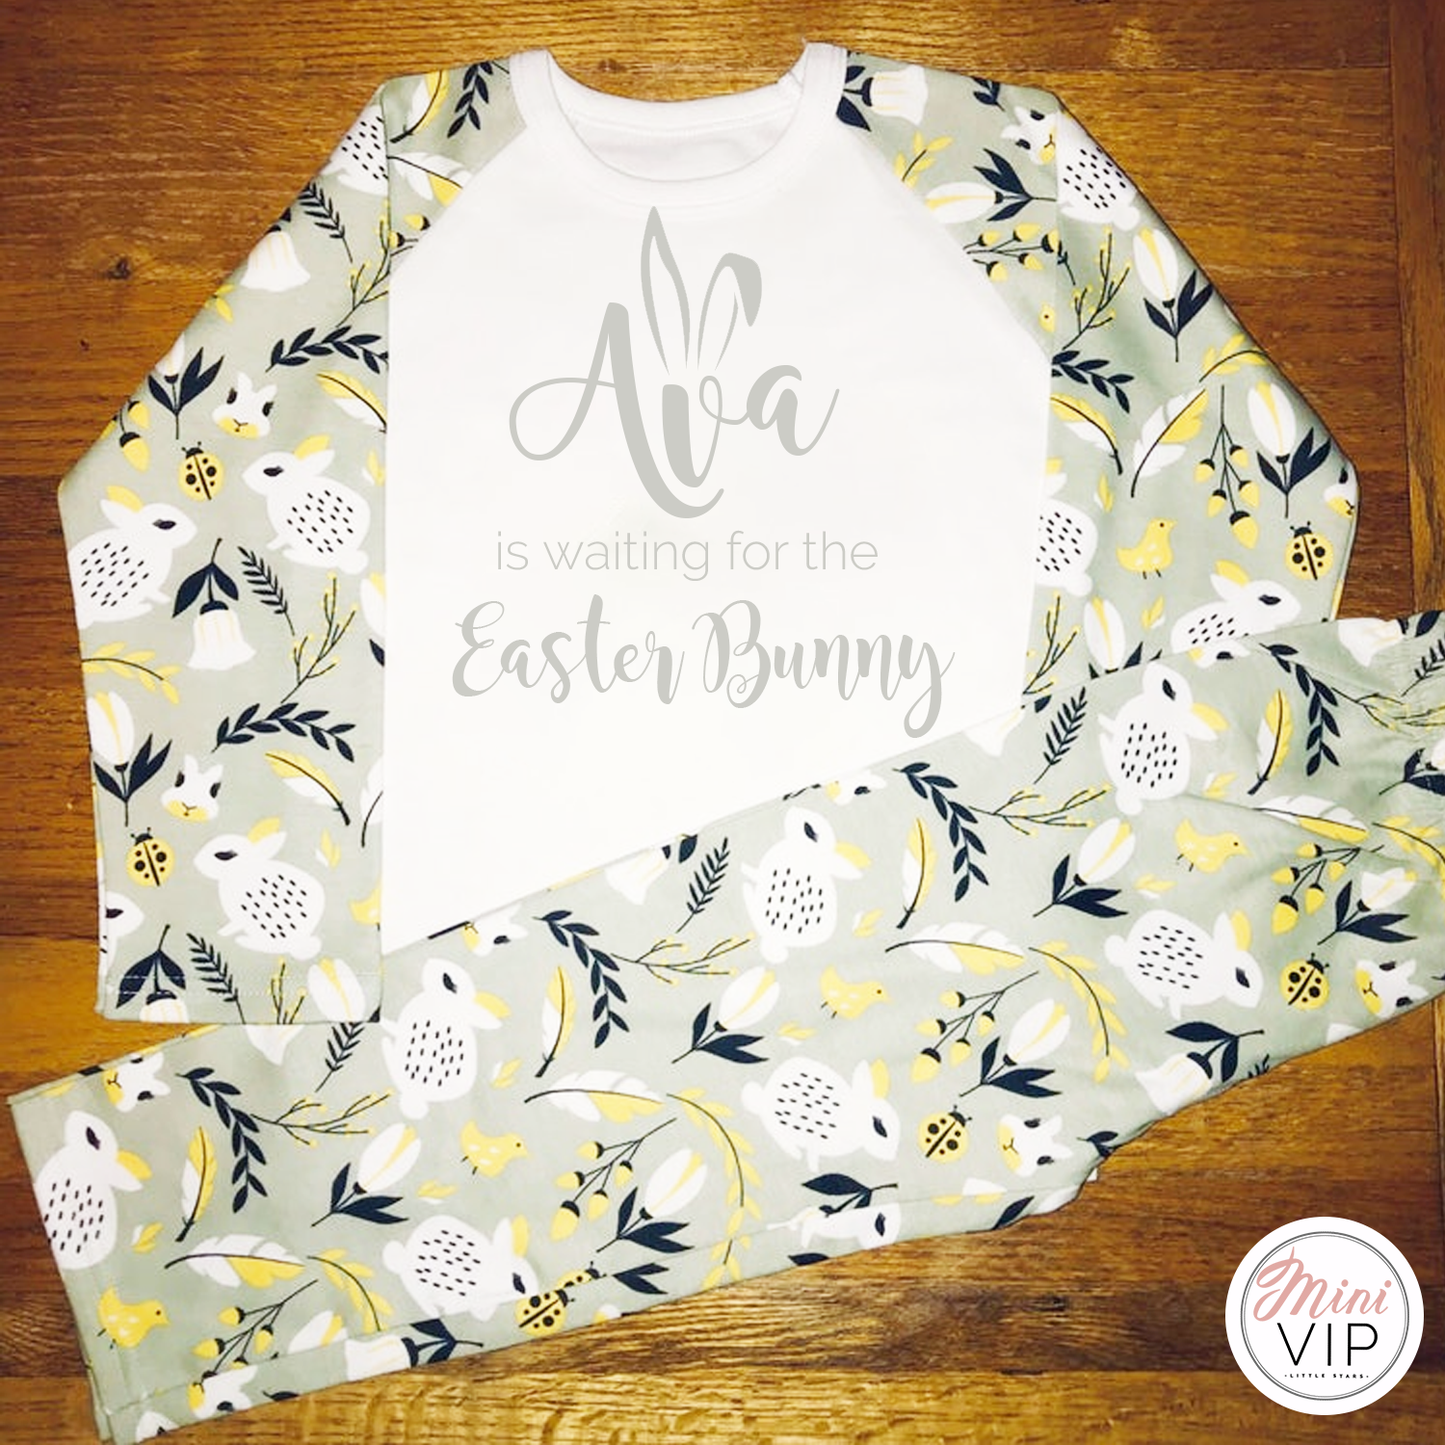 Personalised Grey & Yellow Waiting for the Easter Bunny Print Pajamas